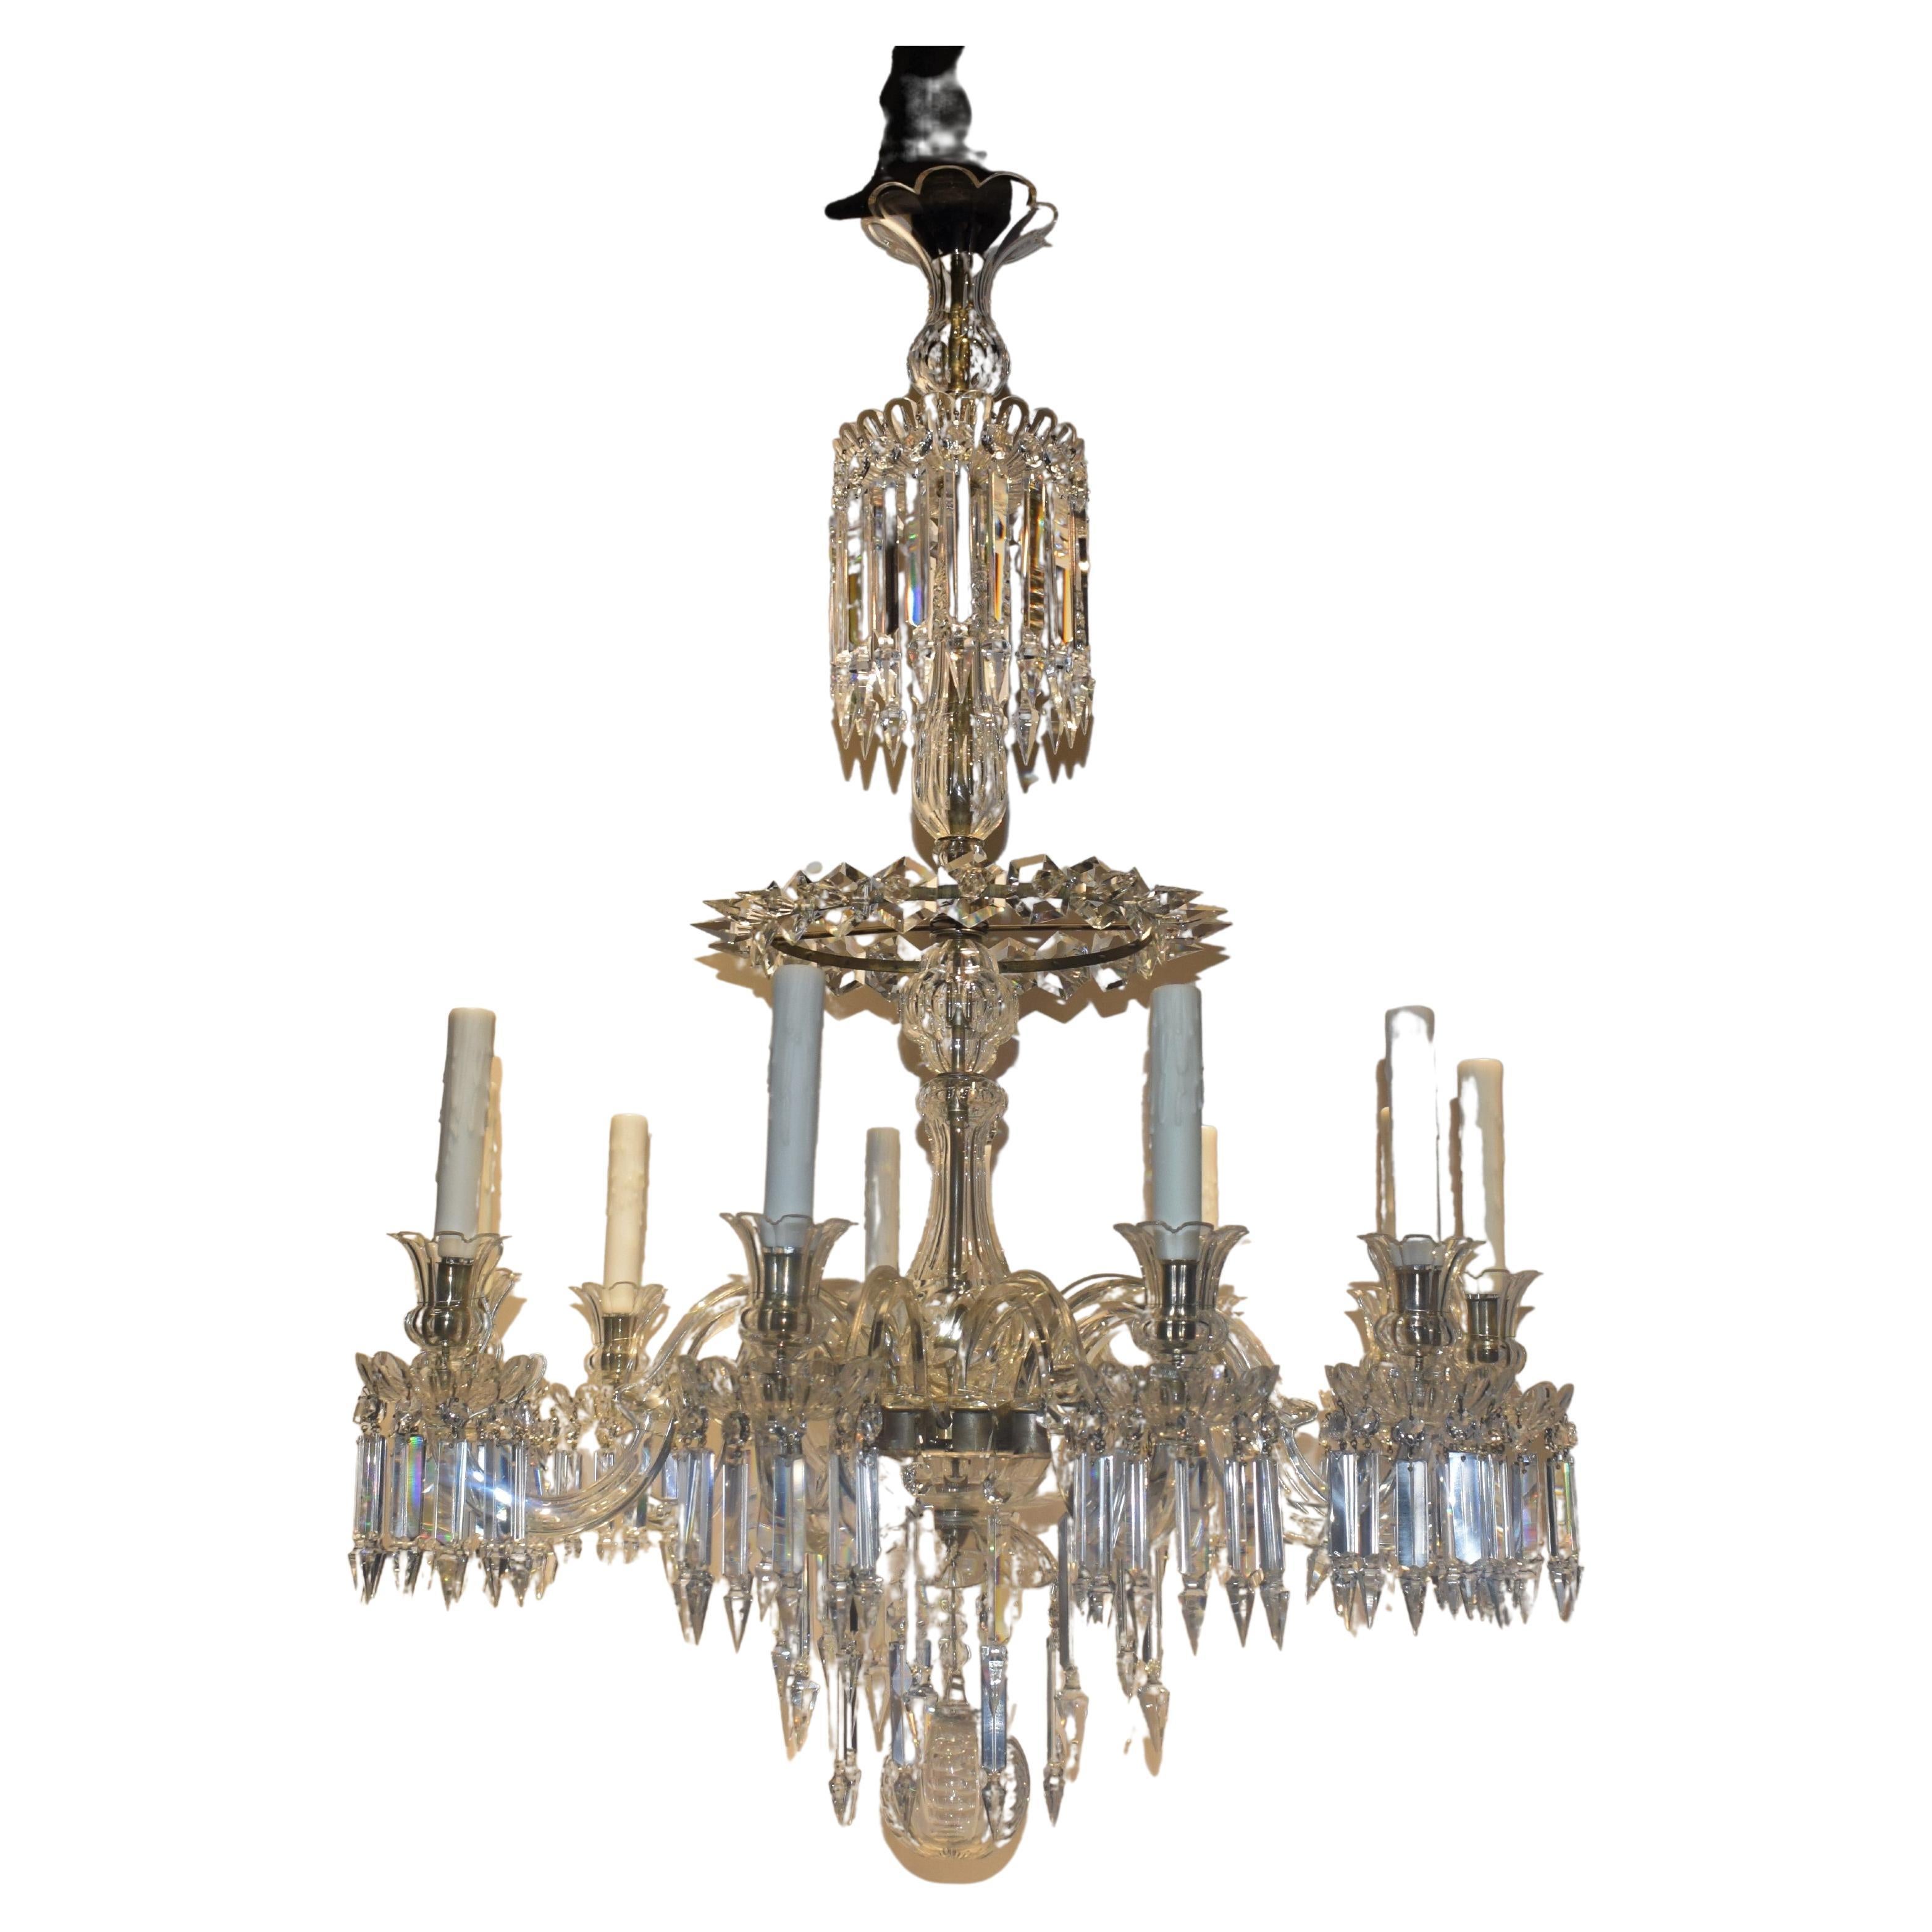 A Very Fine Crystal 10 Light Chandelier by Baccarat